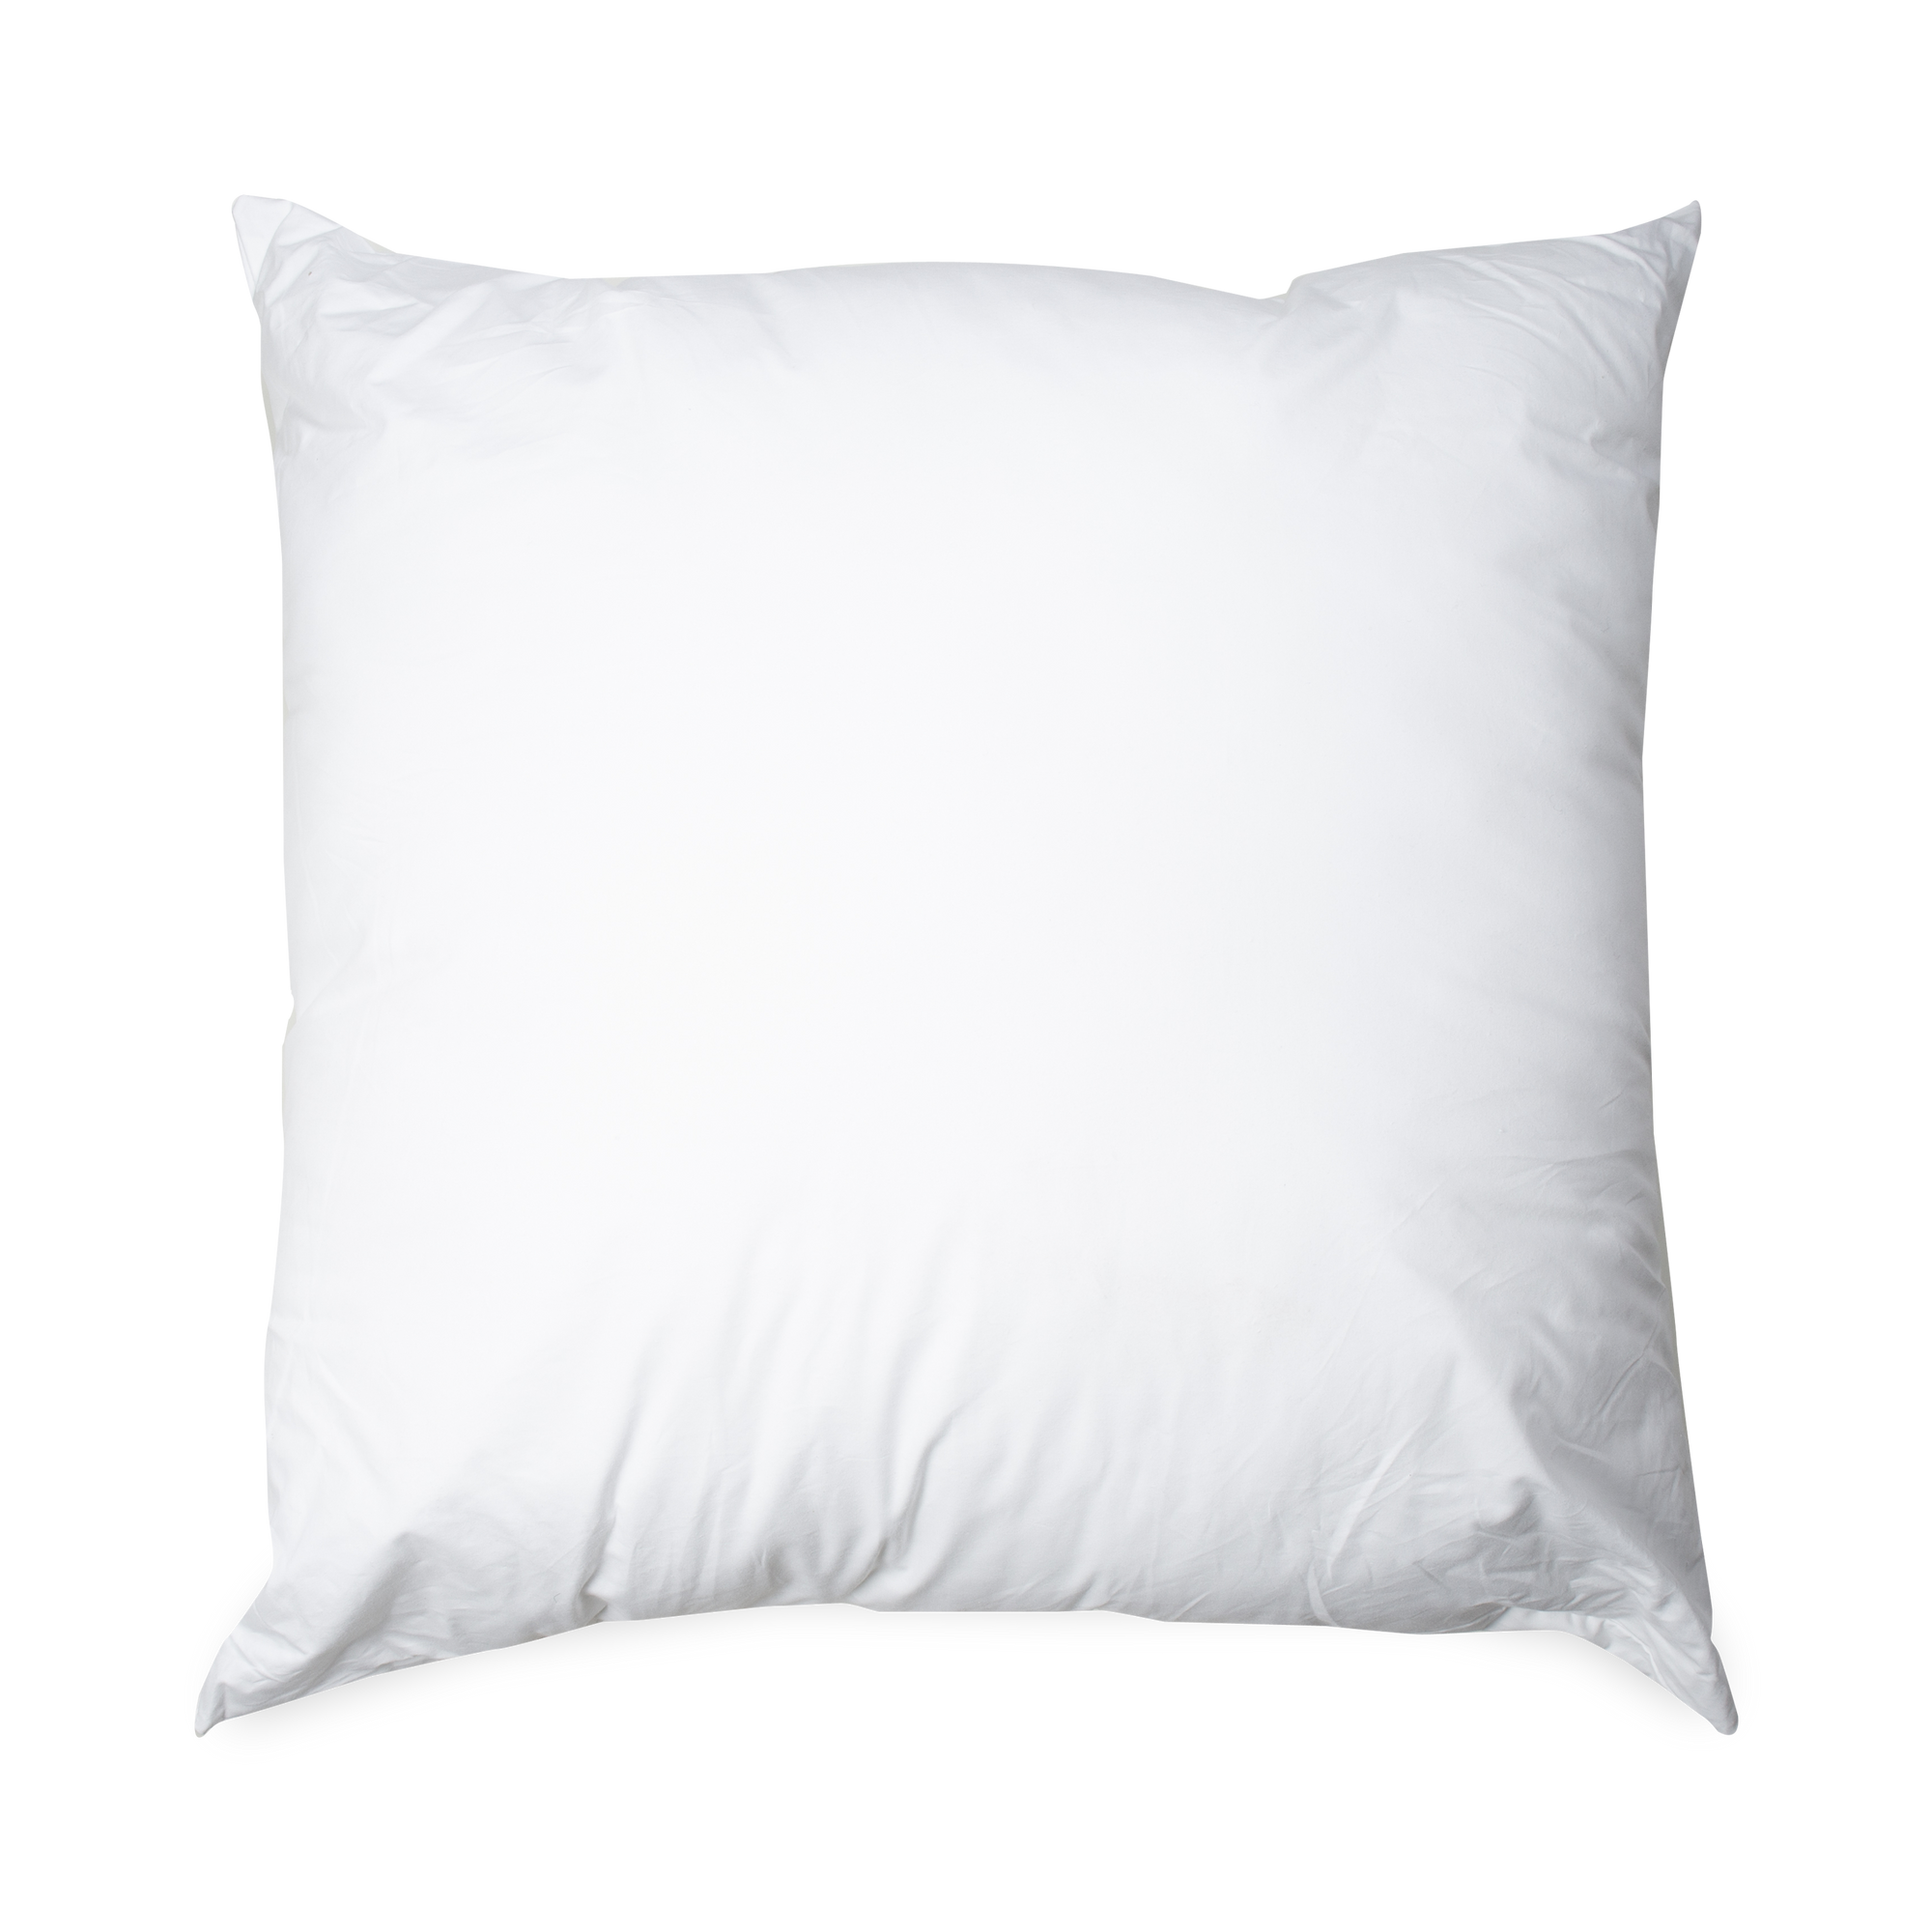 Plush and full, this Euro Pillow is stuffed with materials made from polyfill fibers, making it a great down alternative pillow.